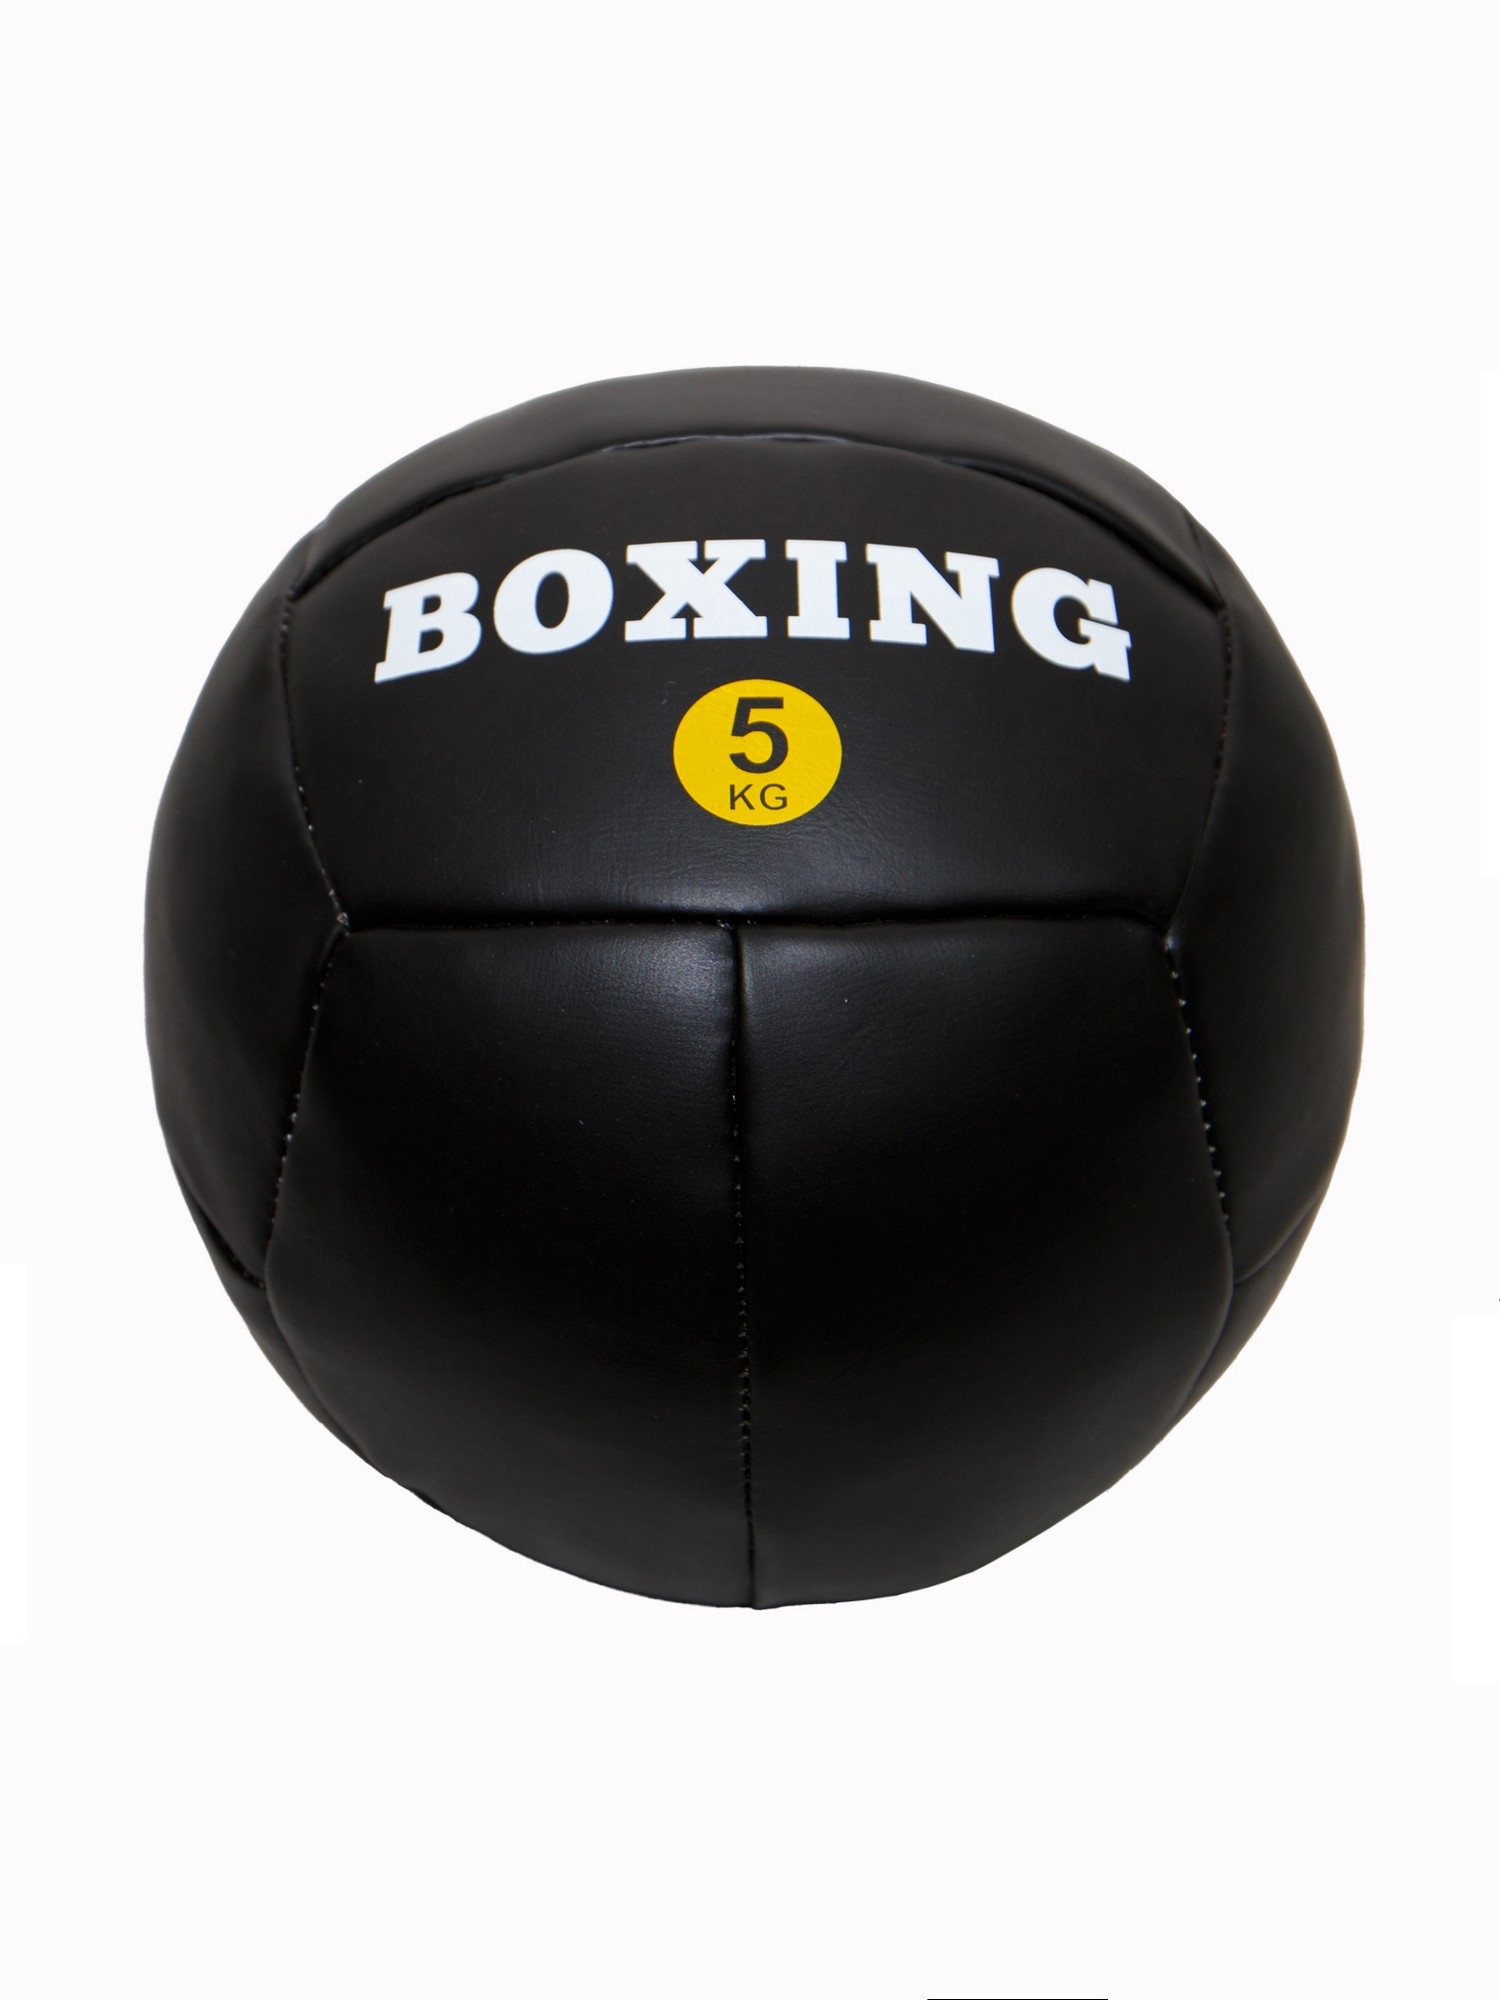 Медицинбол 5кг Totalbox Boxing МДИБ-5 1500_2000